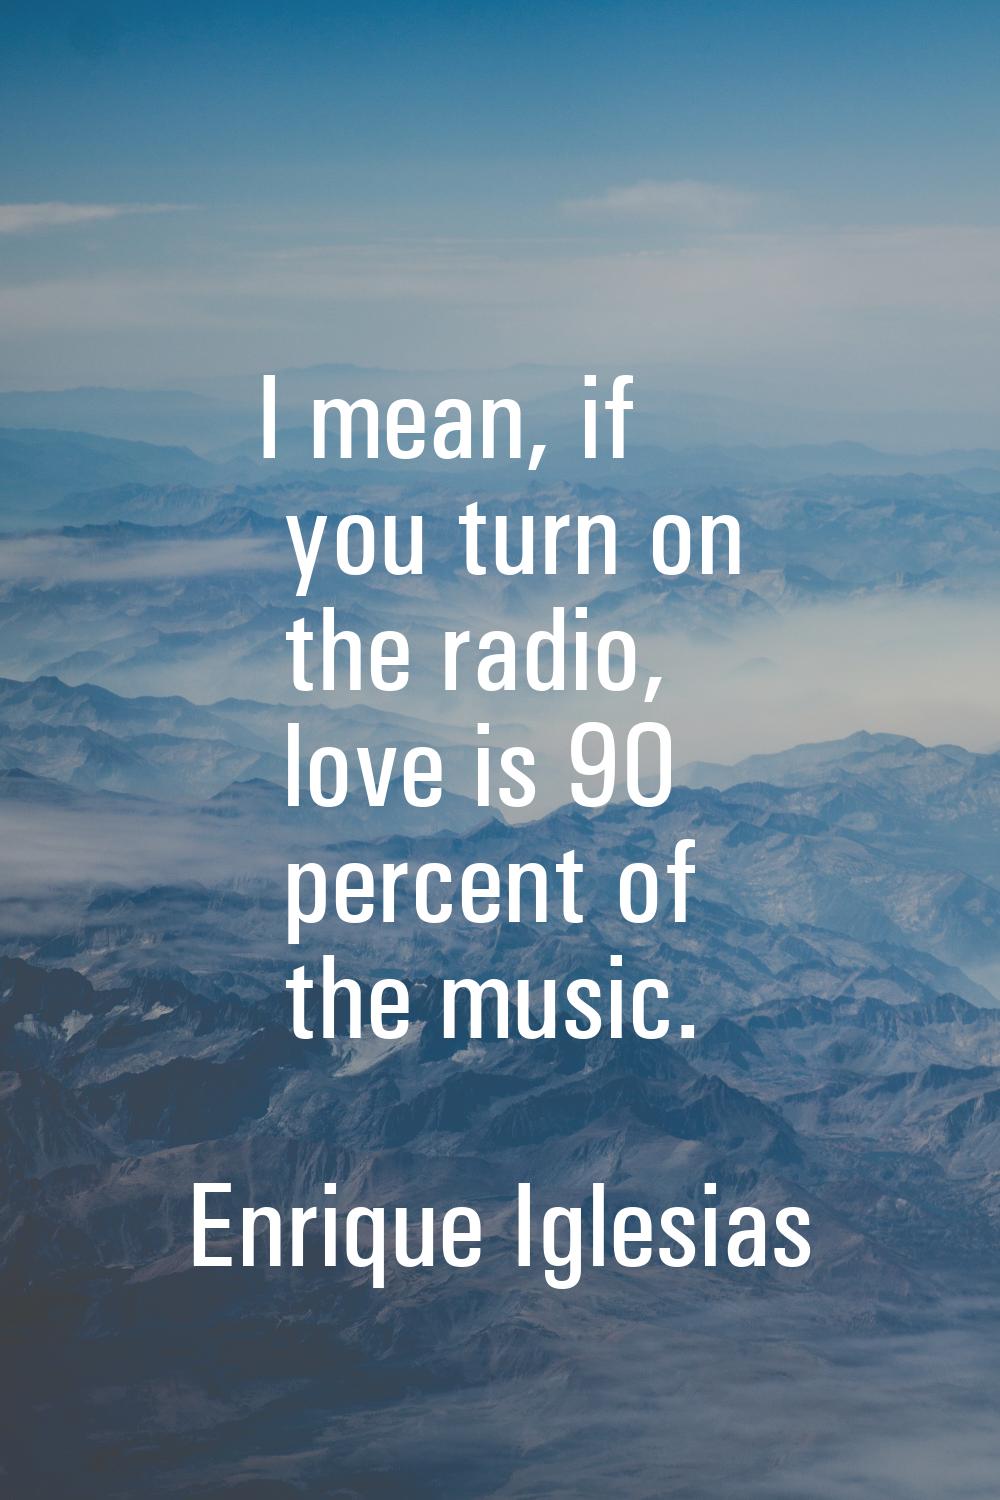 I mean, if you turn on the radio, love is 90 percent of the music.